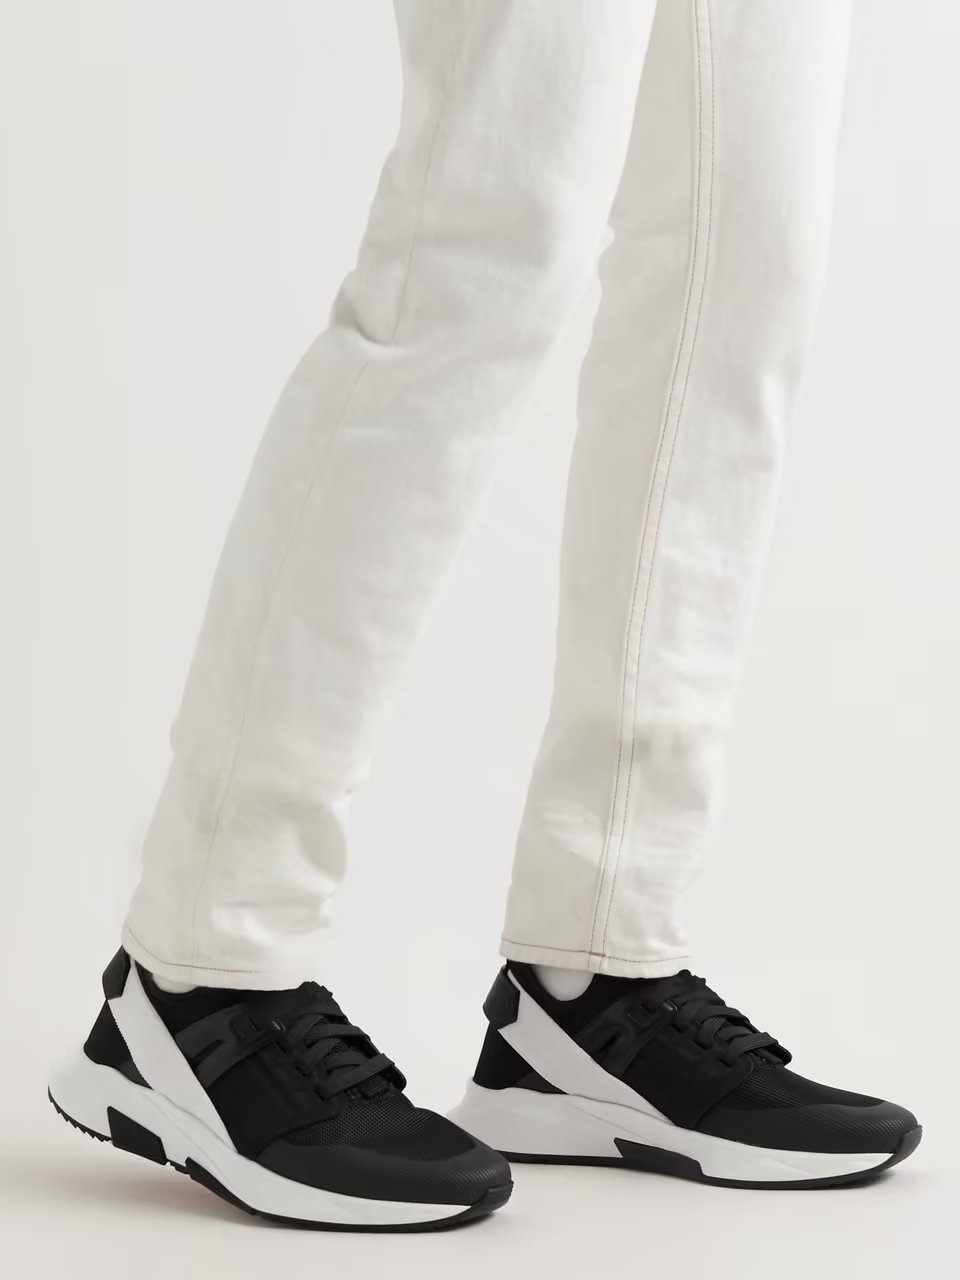 Tom Ford Jago Neoprene, Suede, and Leather Sneakers